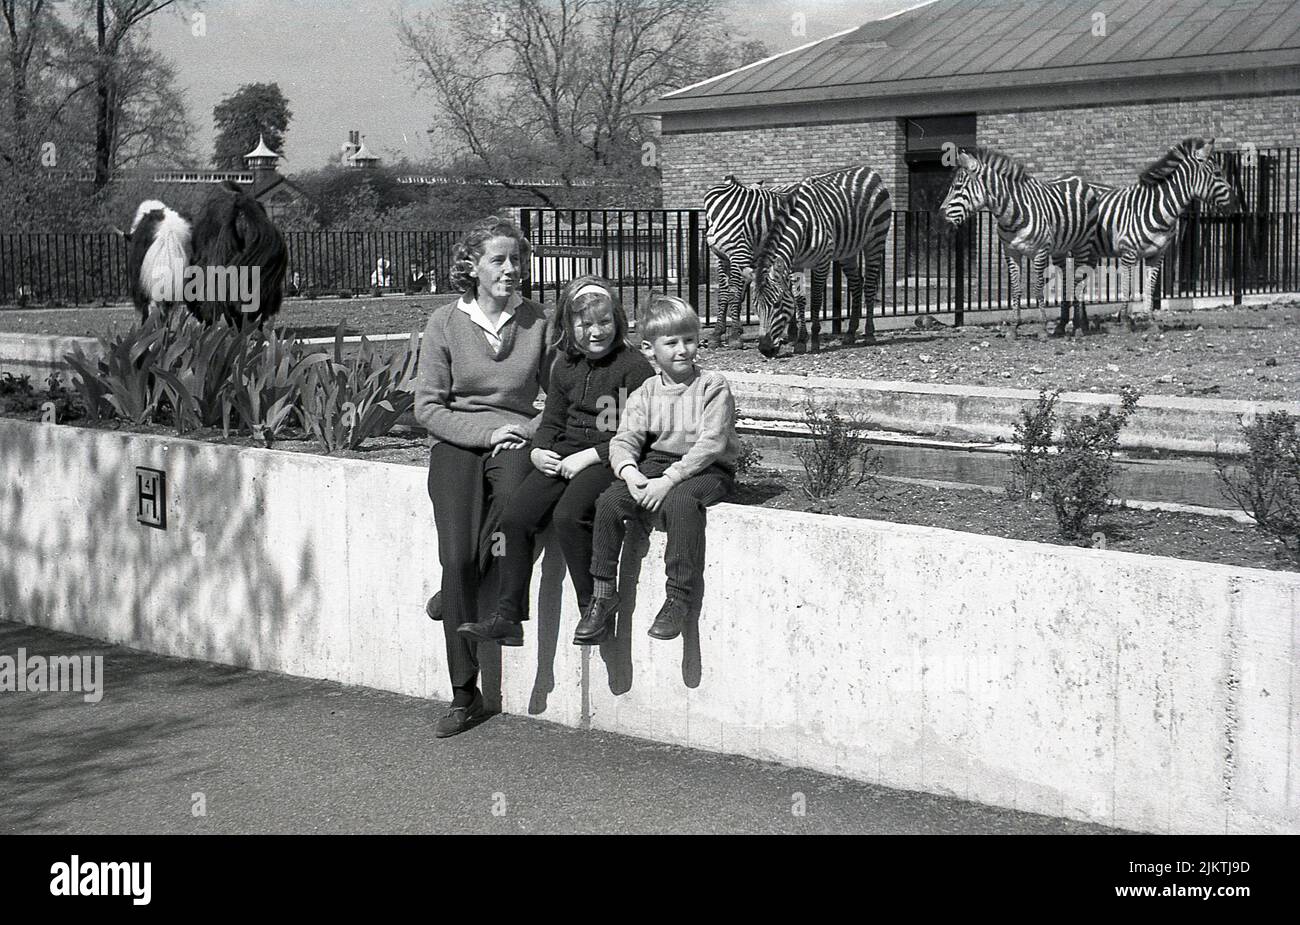 1960, historical, a mother with her two young children sitting on a wall near the Zebra enclosure at London Zoo, England, UK. Behind them, a sign on railing  says, Do Not feed the Zebras. Stock Photo